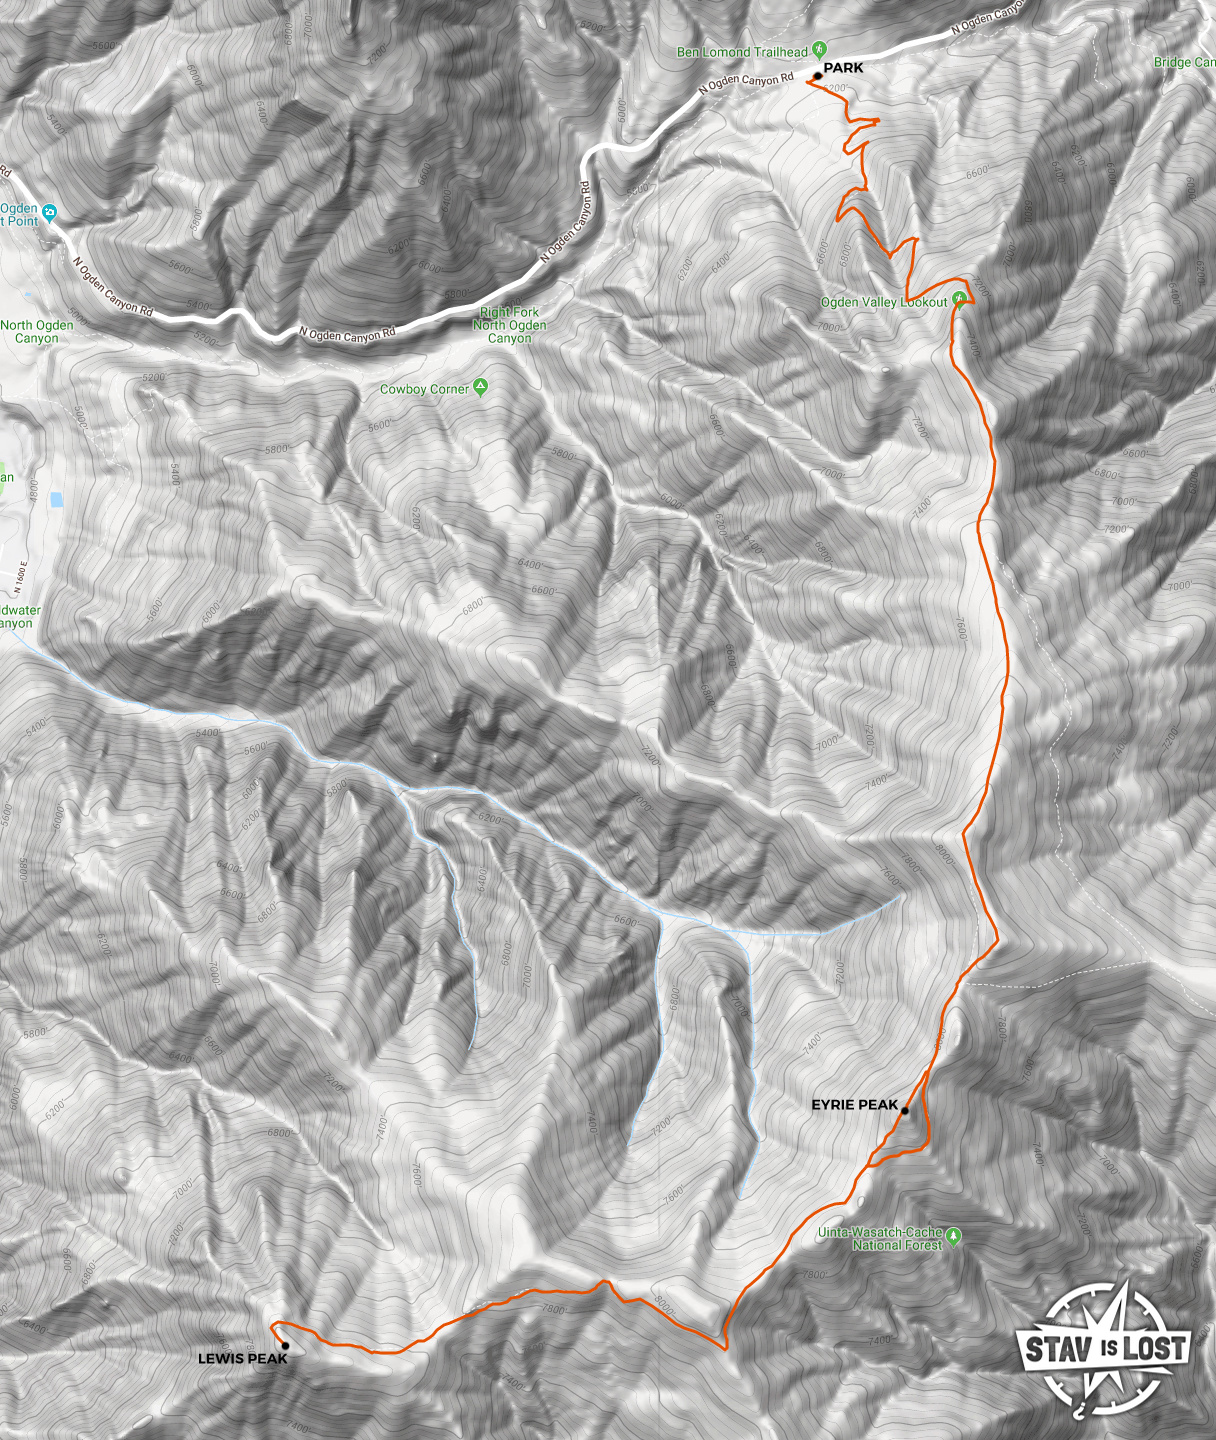 map for Eyrie Peak and Lewis Peak via South Skyline Trail by stav is lost